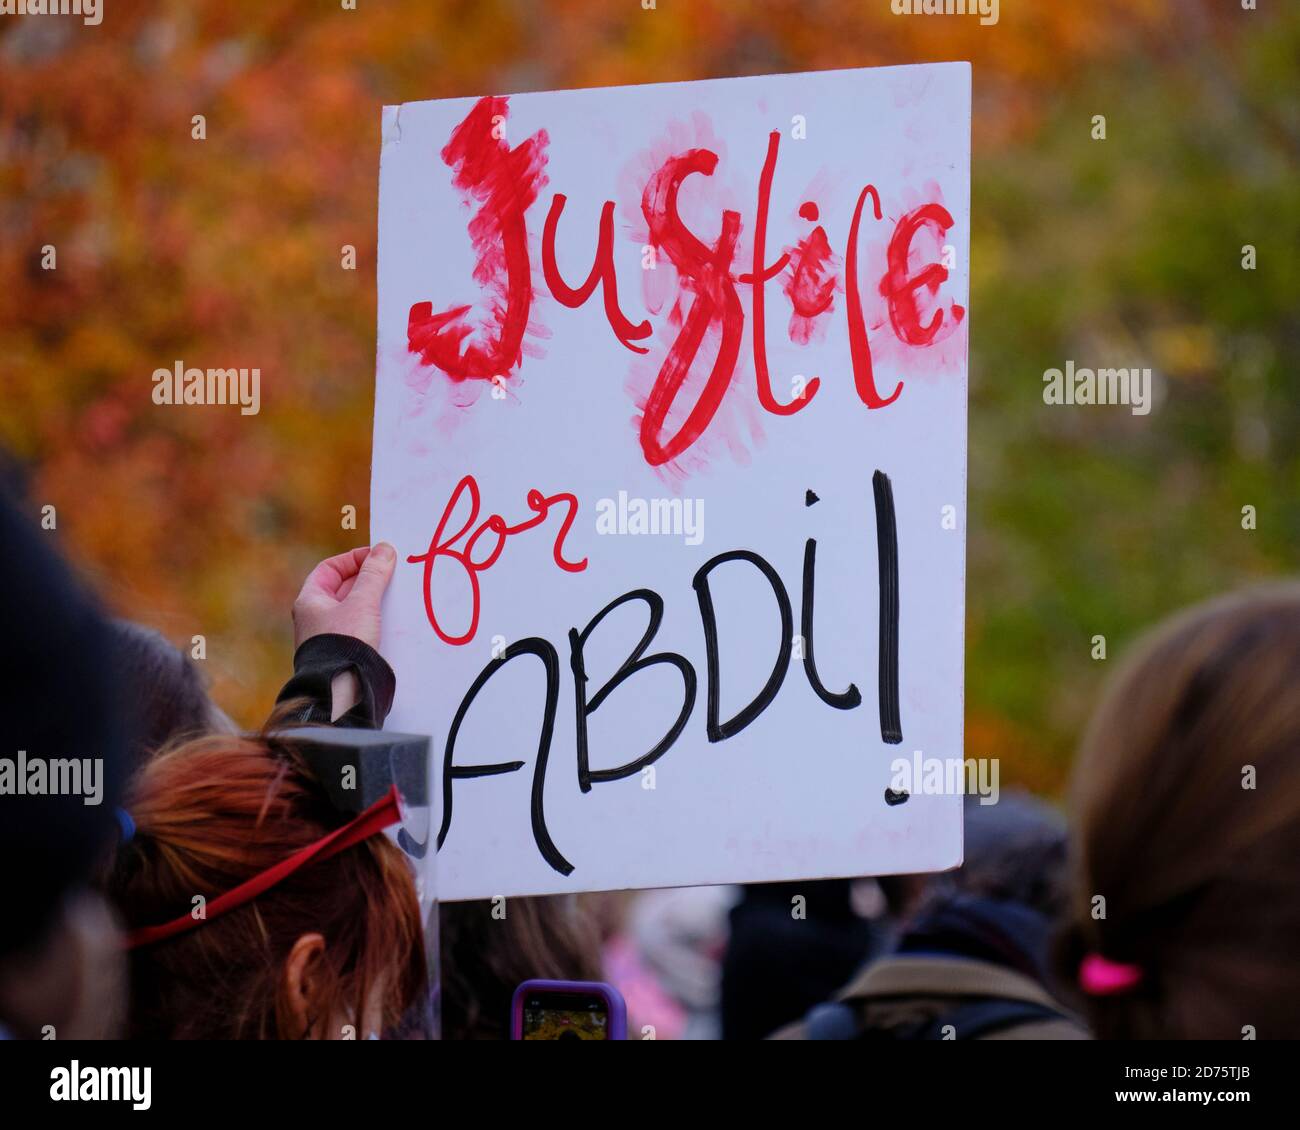 Ottawa, Canada. October 20th, 2020. About 500 people took to the street demanding justice for Abdirahman Abdi, who was killed during his arrest in 2016. Earlier today, the court found the arresting officer Ottawa police Const. Daniel Montsion not guilty on all charges related to the death. This is another case in the ongoing community battle between the police and black members of the community. Abdi had come to Canada from Somalia in 2009 and at the time of his death was 37. Credit: meanderingemu/Alamy Live News Stock Photo